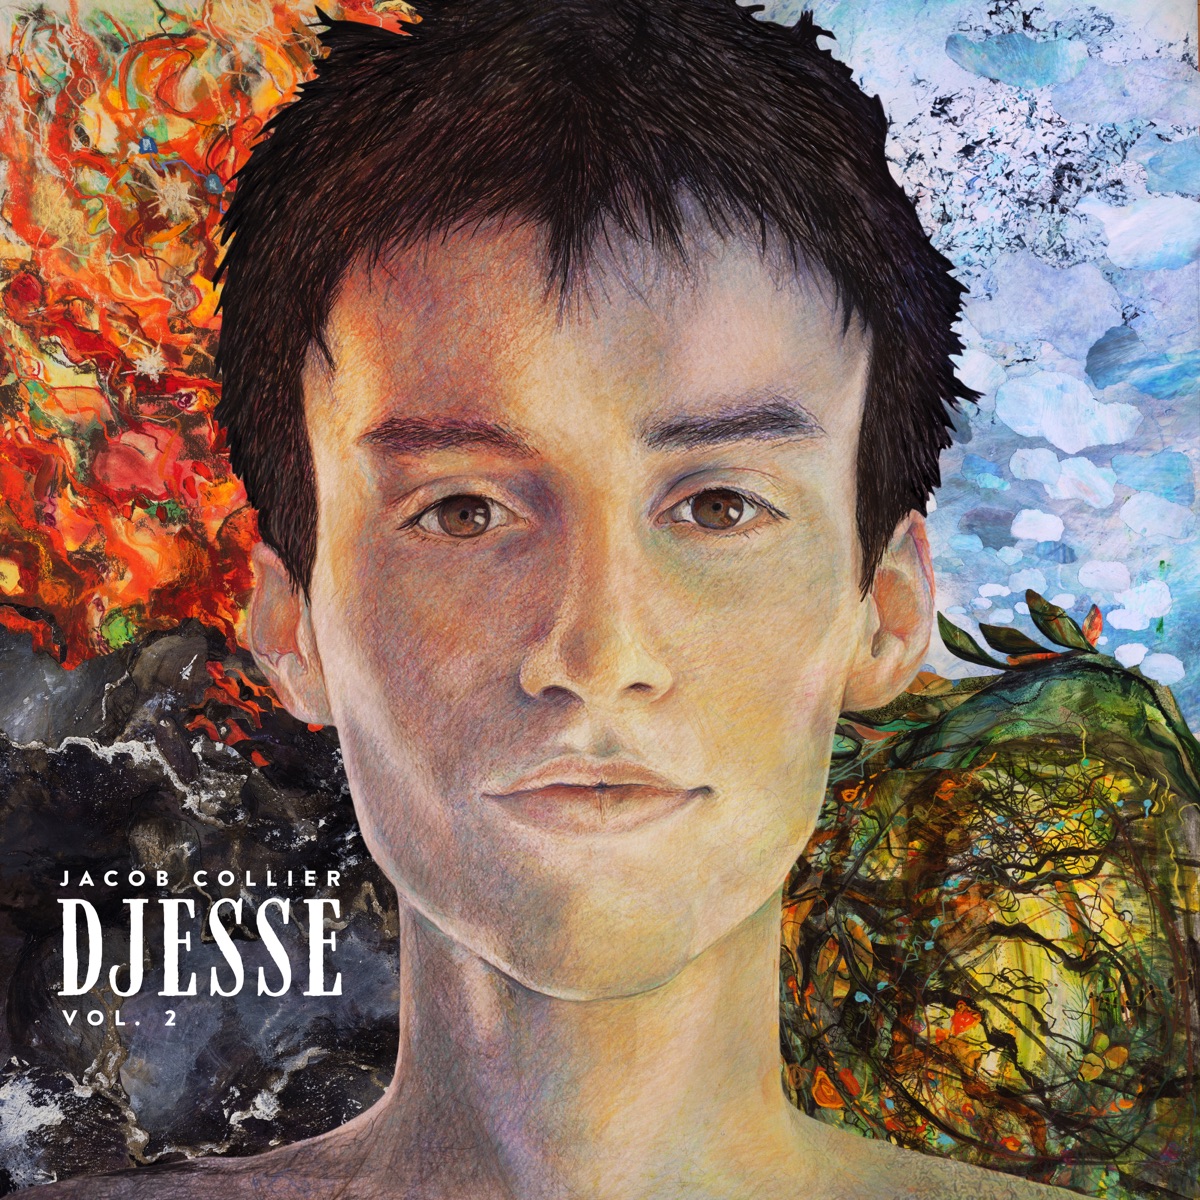 The Sun Is In Your Eyes (Voice Memo) - Single by Jacob Collier on Apple  Music